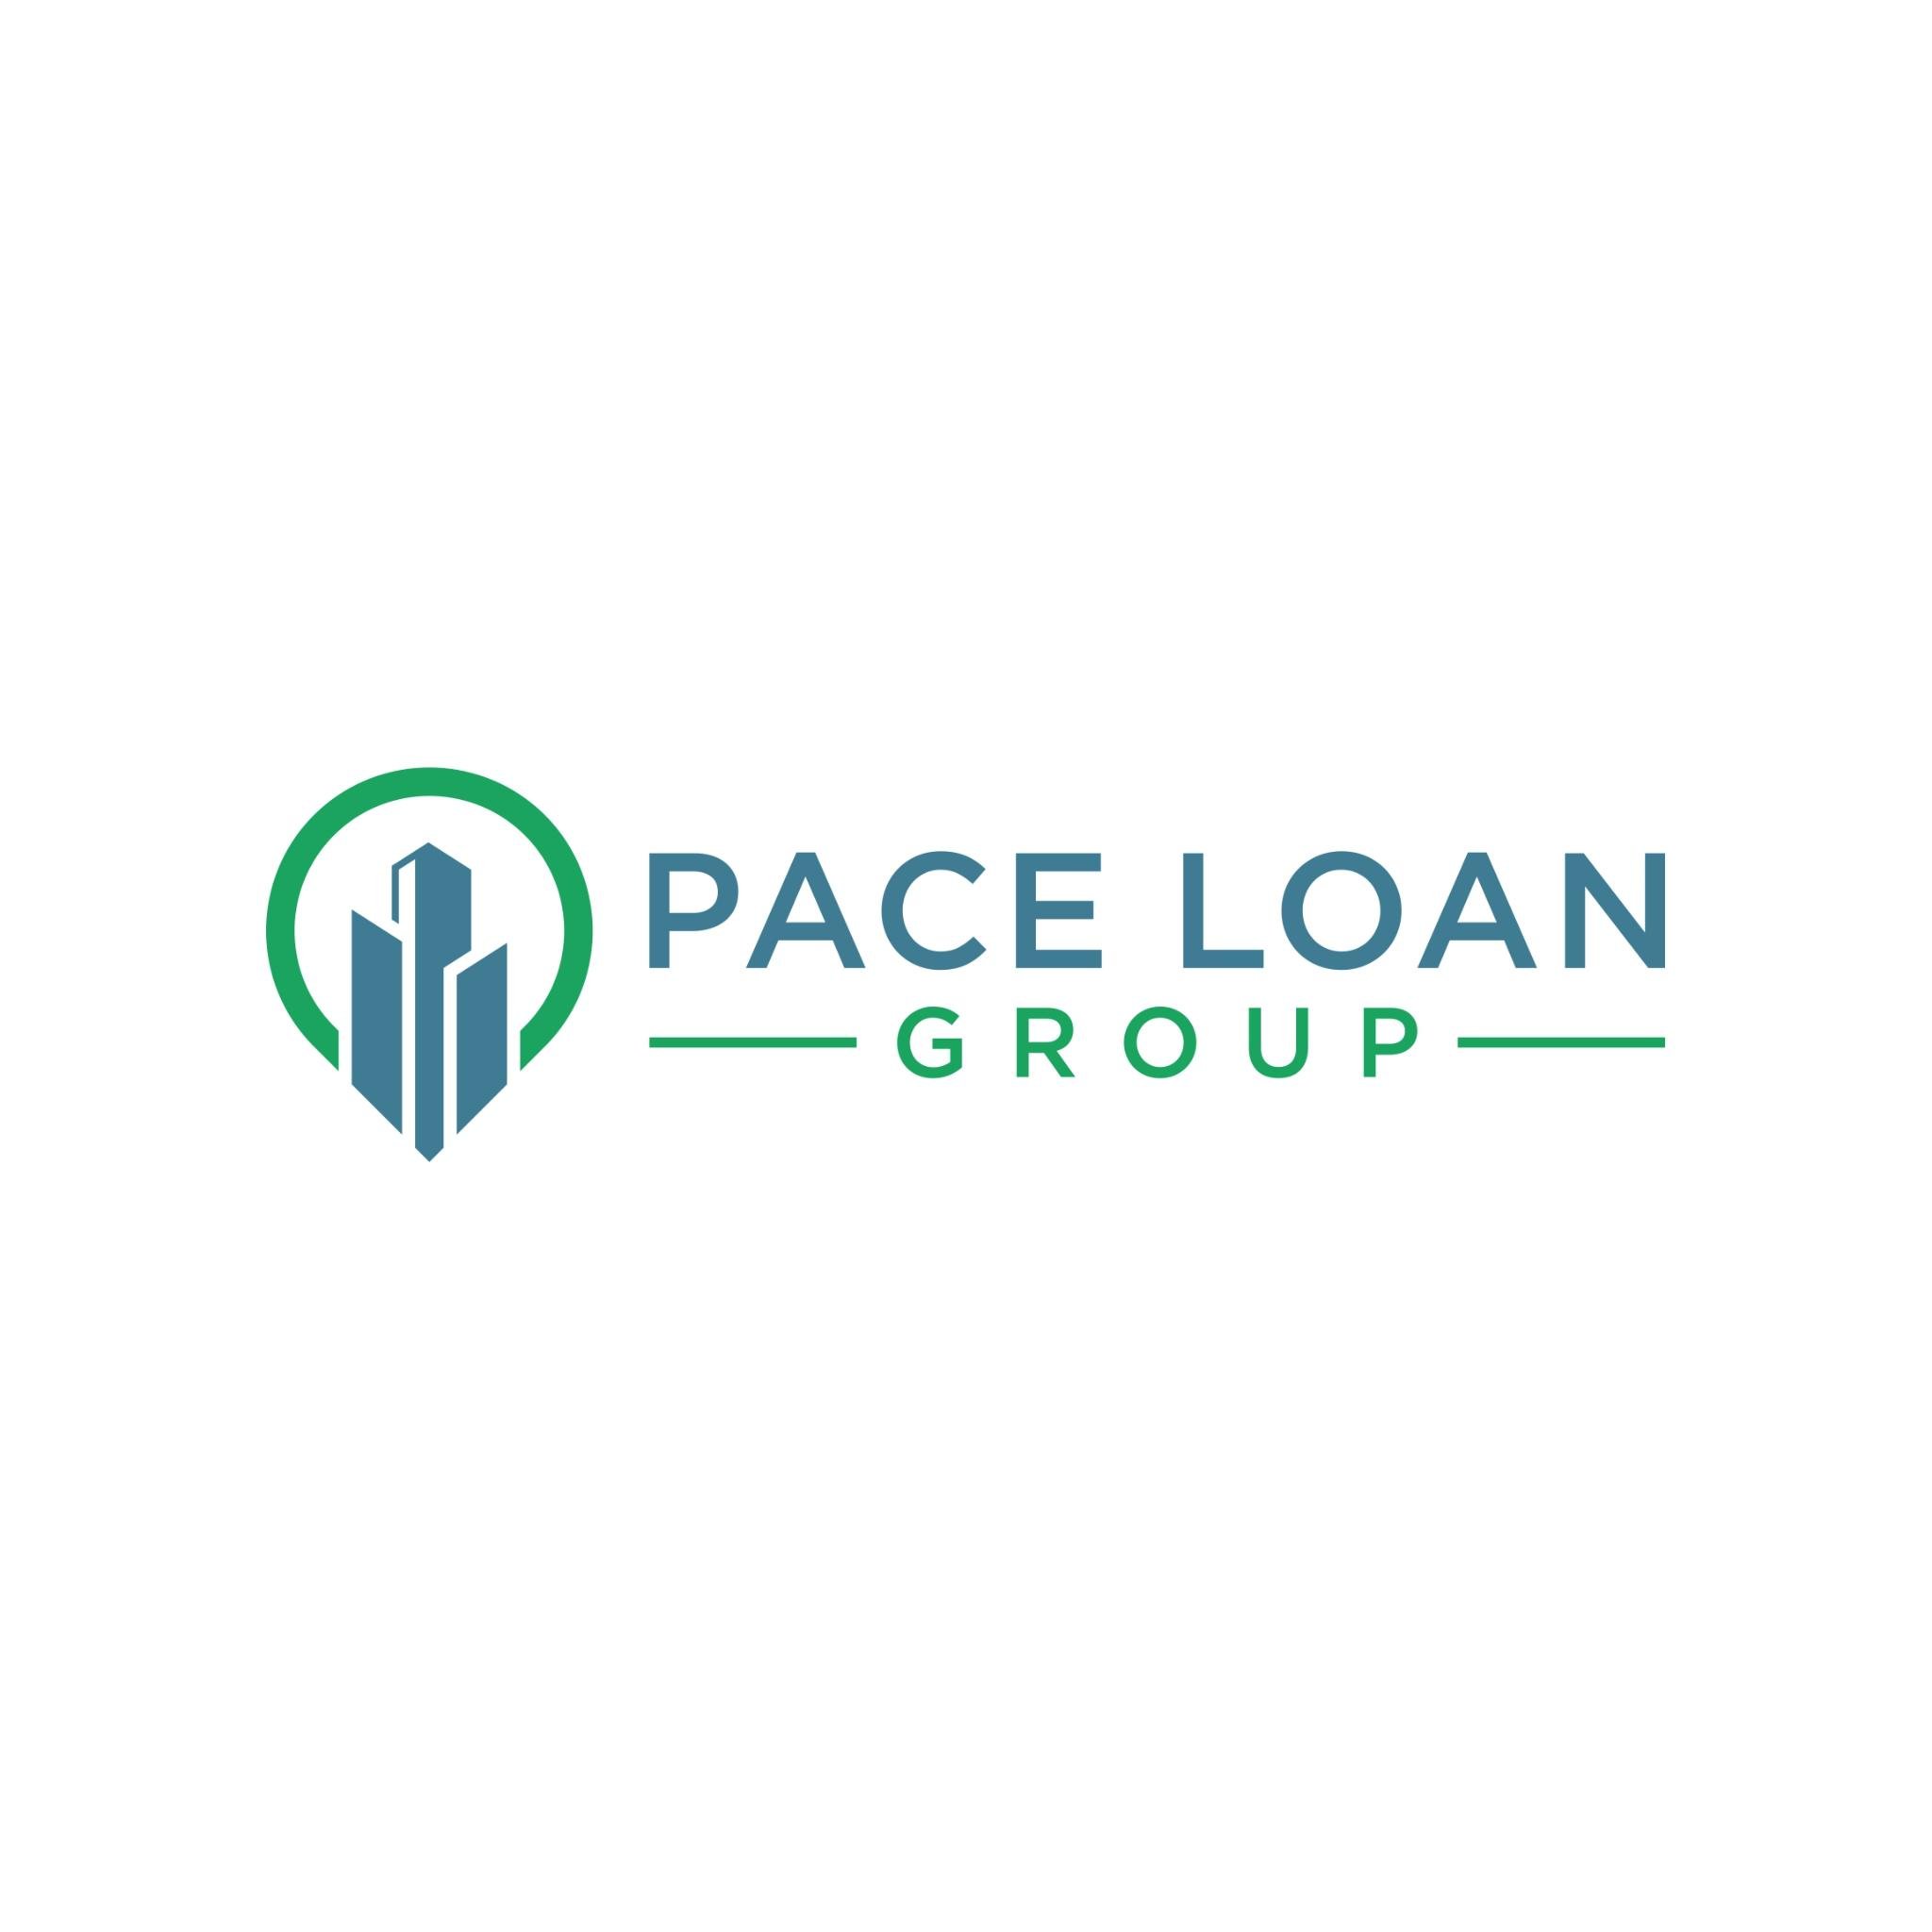 We are a leading C-PACE lender working nationwide. As a direct lender with 10+ years of experience, we ensure a fast and efficient closing.